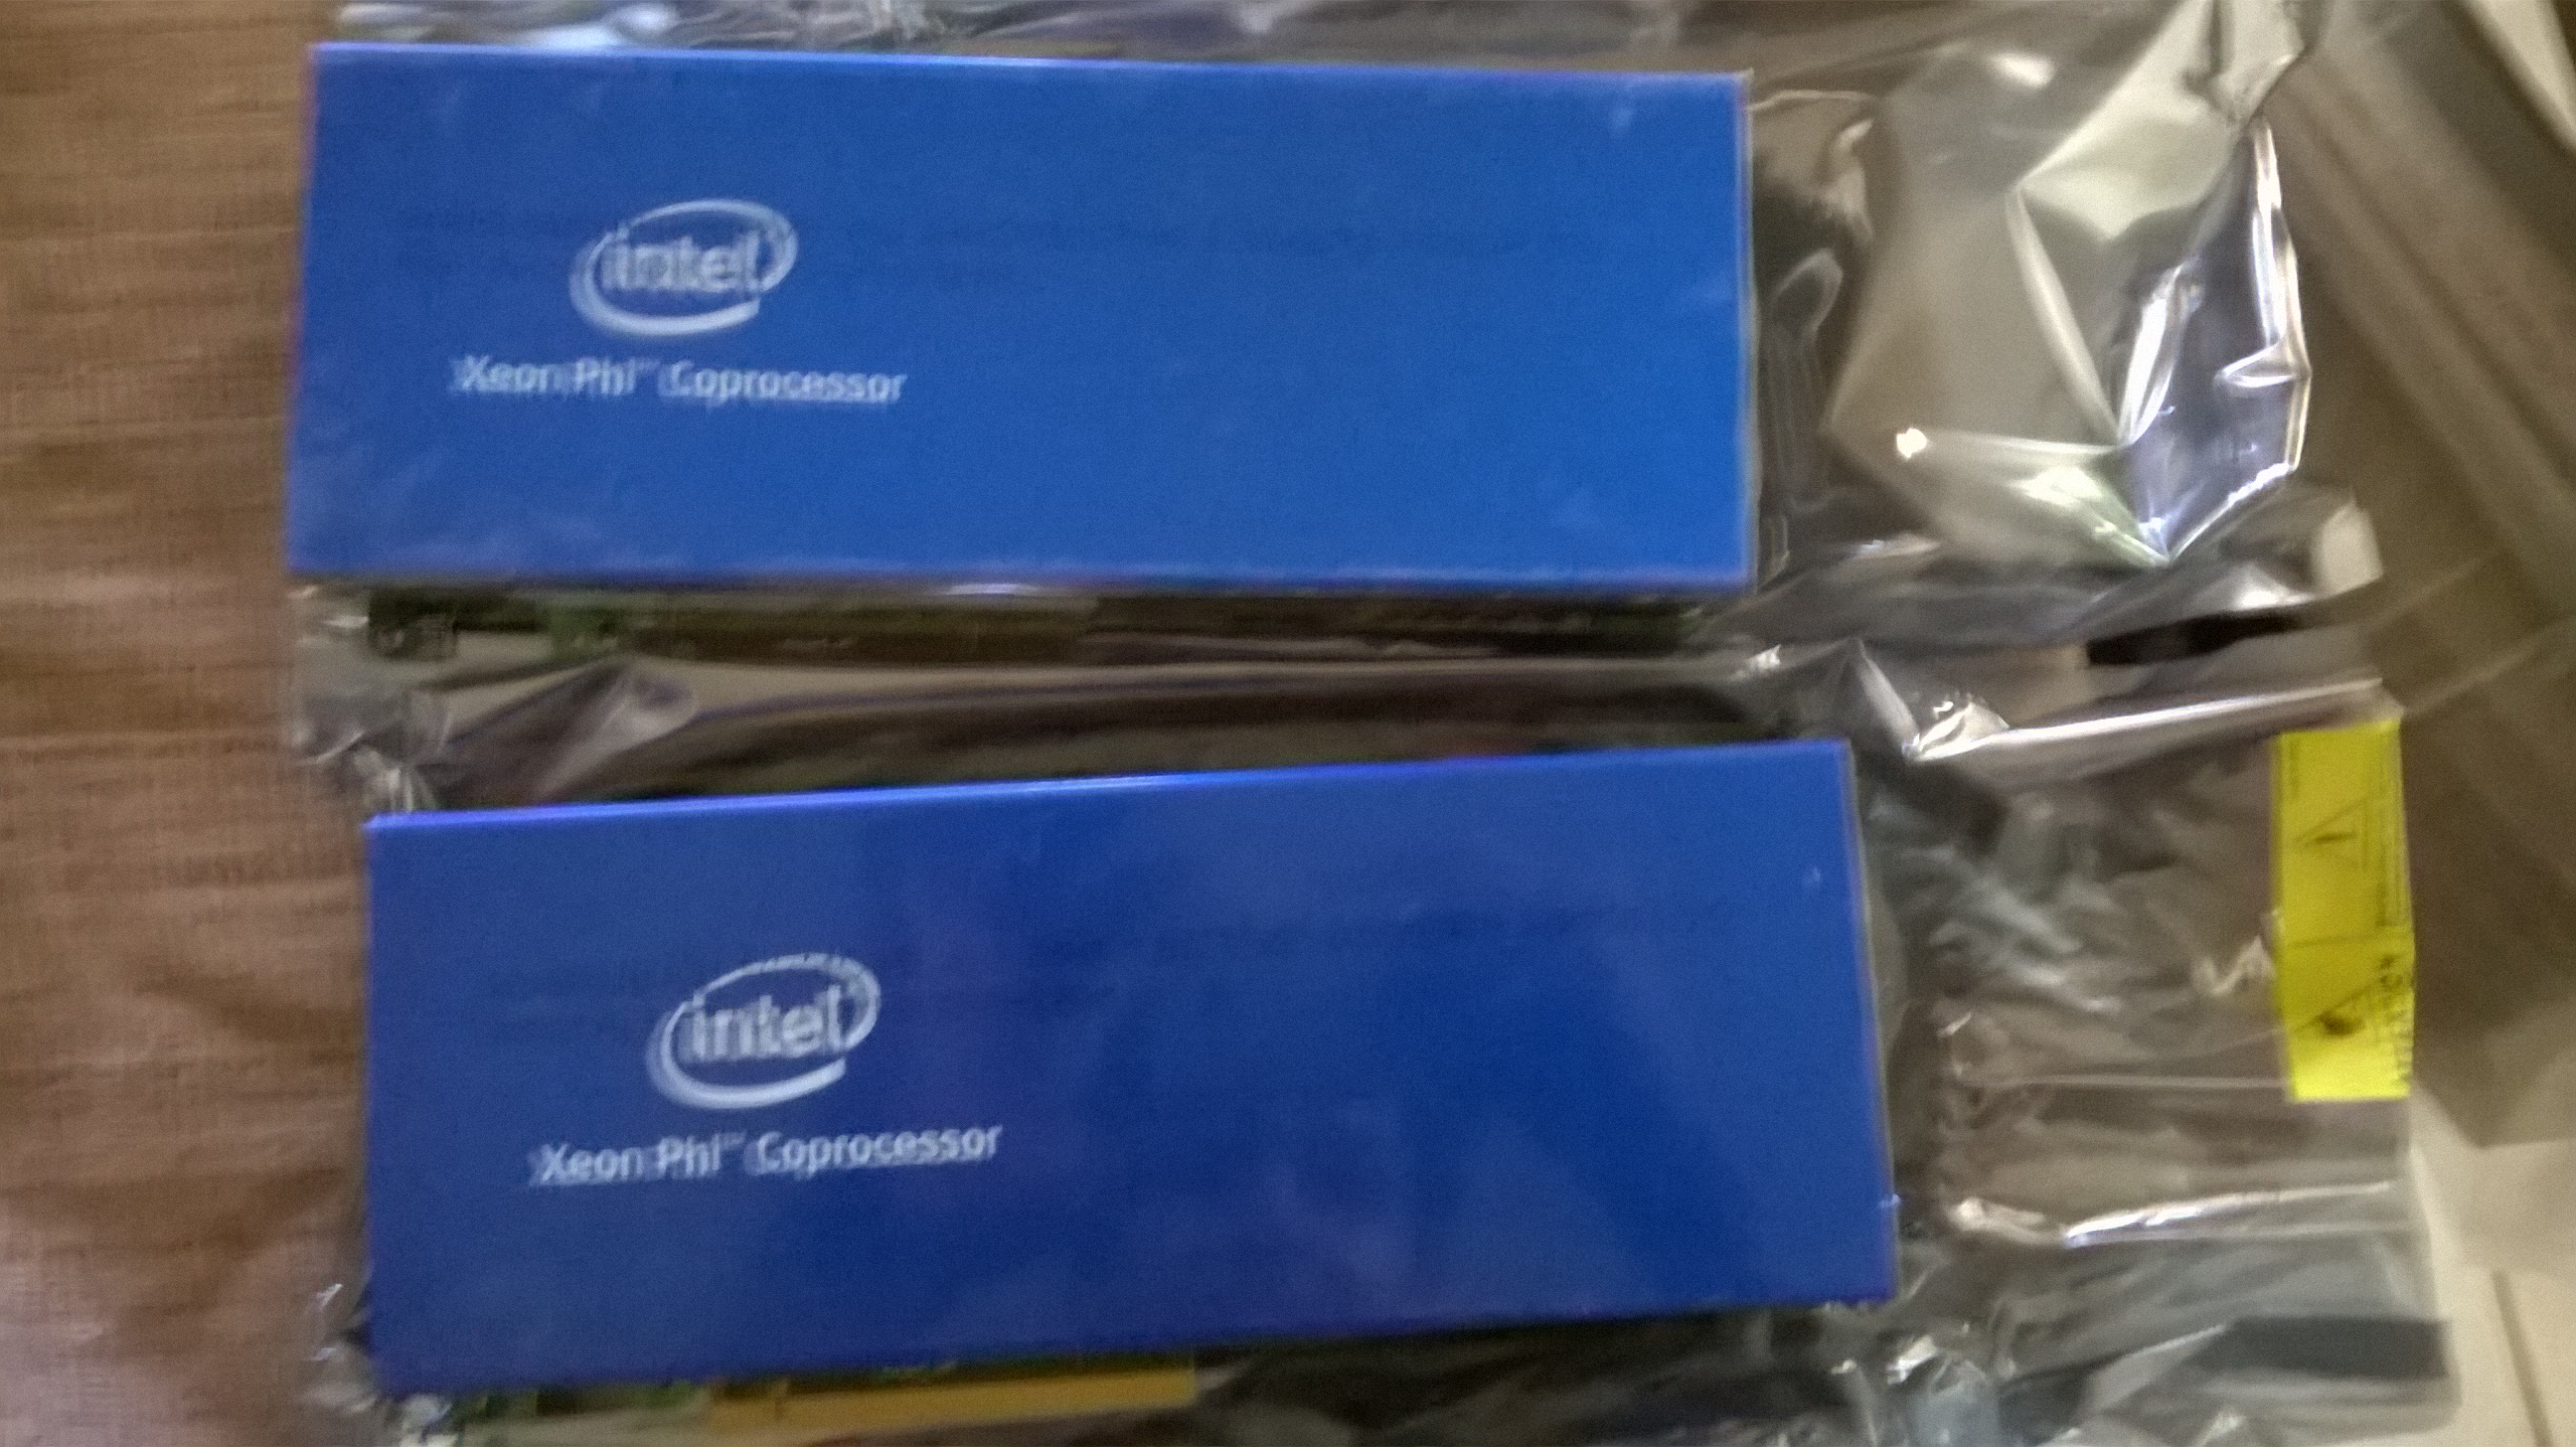 Xeon Phi 31S1P for <$ | ServeTheHome Forums